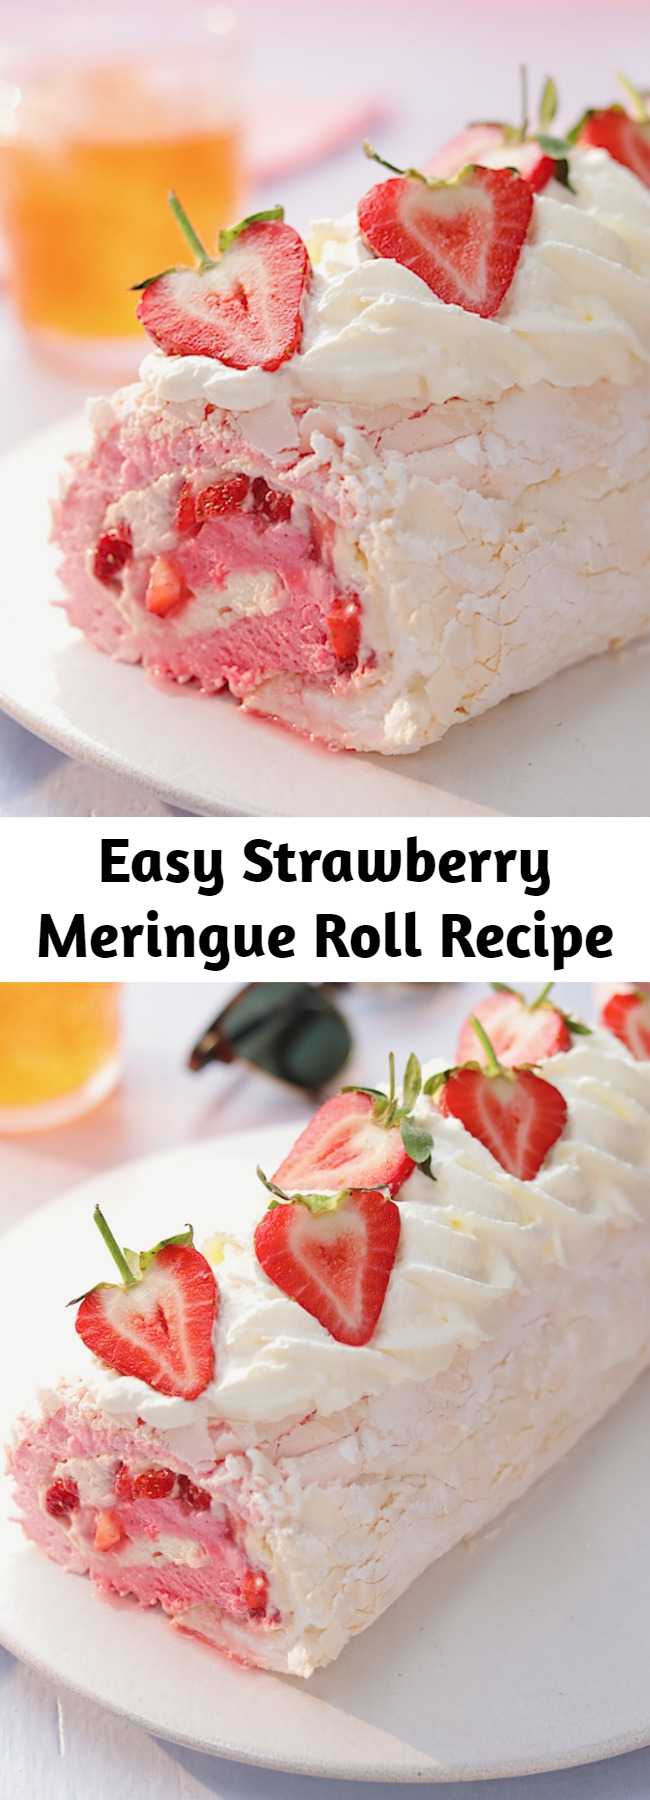 Easy Strawberry Meringue Roll Recipe - We've combined a pavlova and a swiss roll to make your ultimate fruity dessert! This strawberry meringue roll is a sure crowd pleaser.